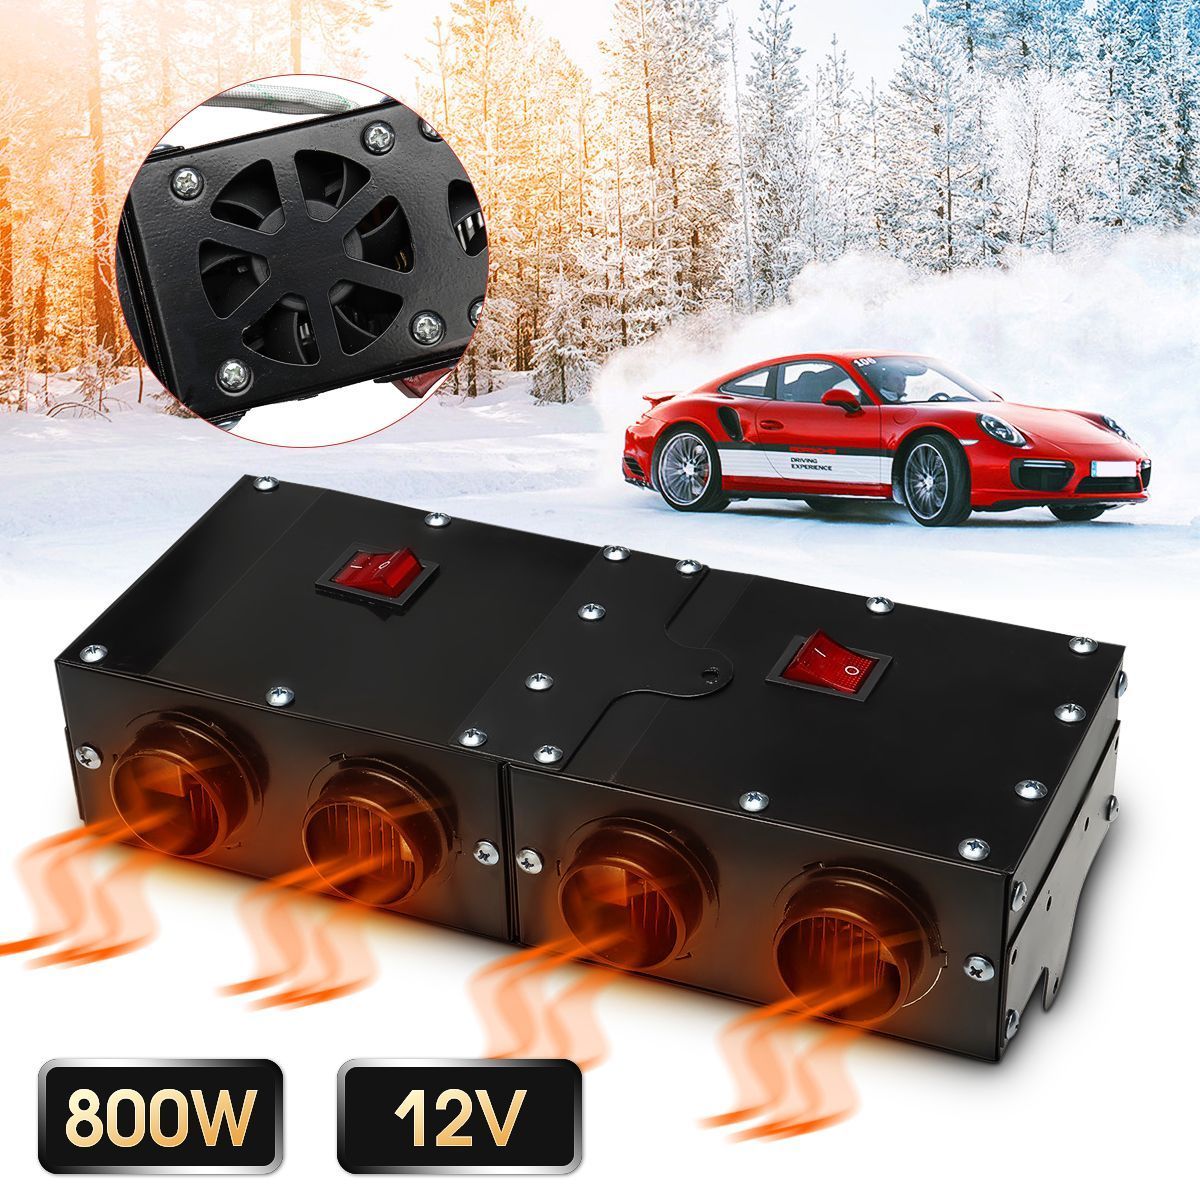 800W-12V-Car-Windscreen-Defrosting-Demister-Heating-Warmer-Car-Heater-with-Four-Fans-1303787